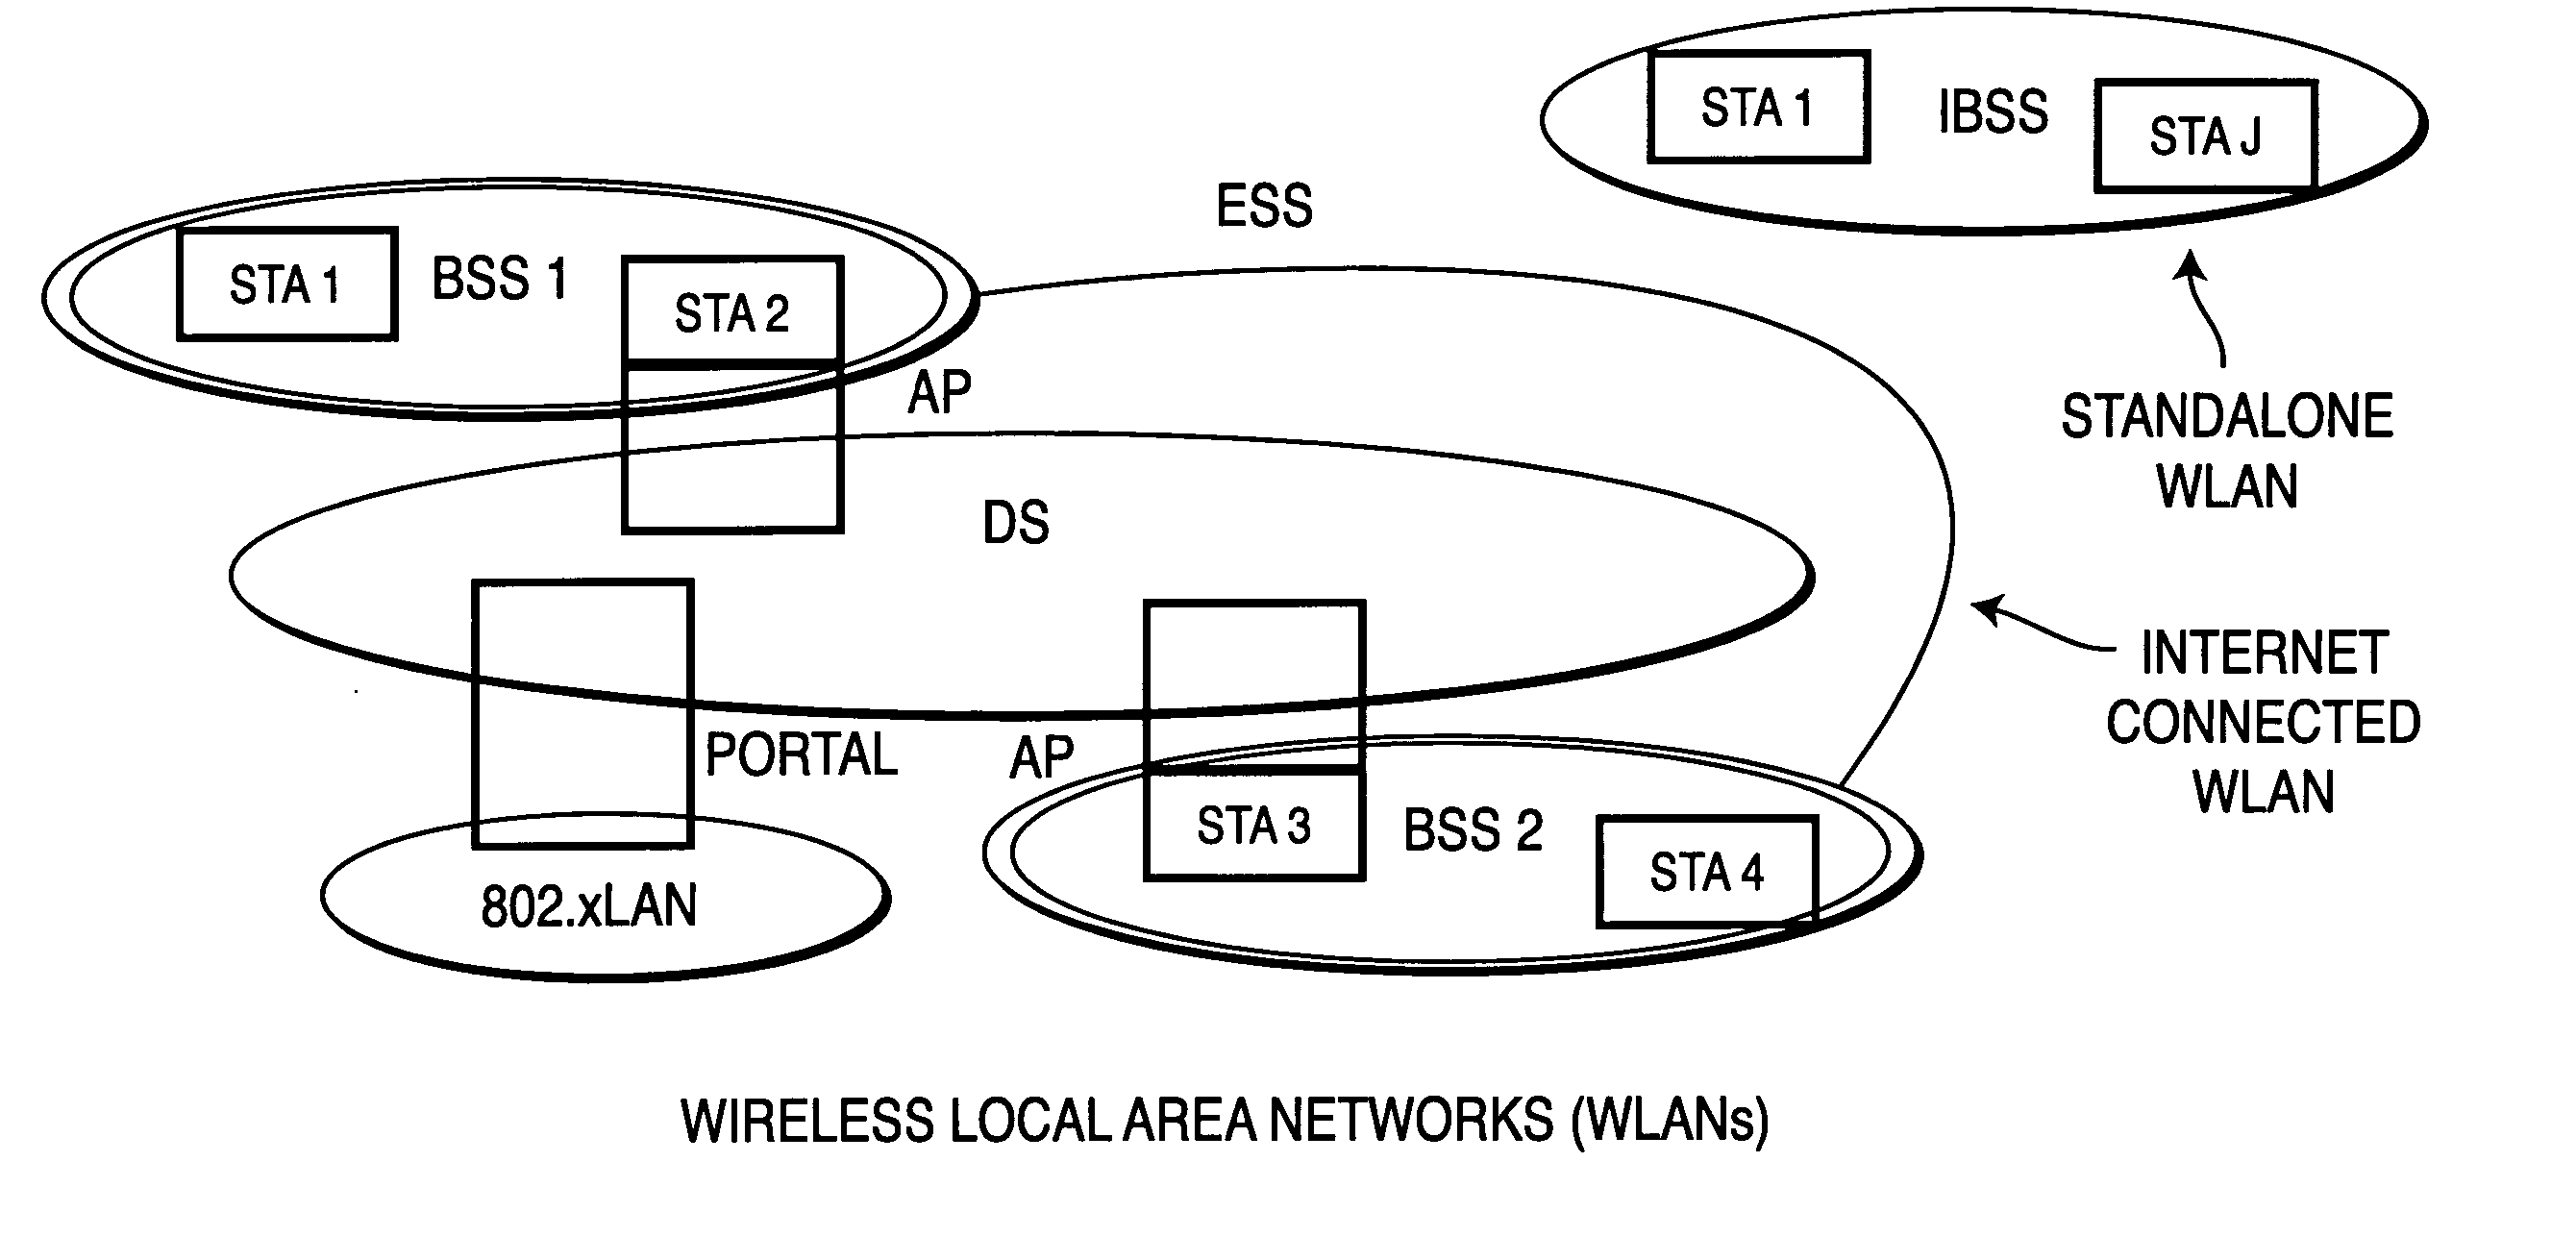 Method and apparatus for determining and managing congestion in a wireless communications system